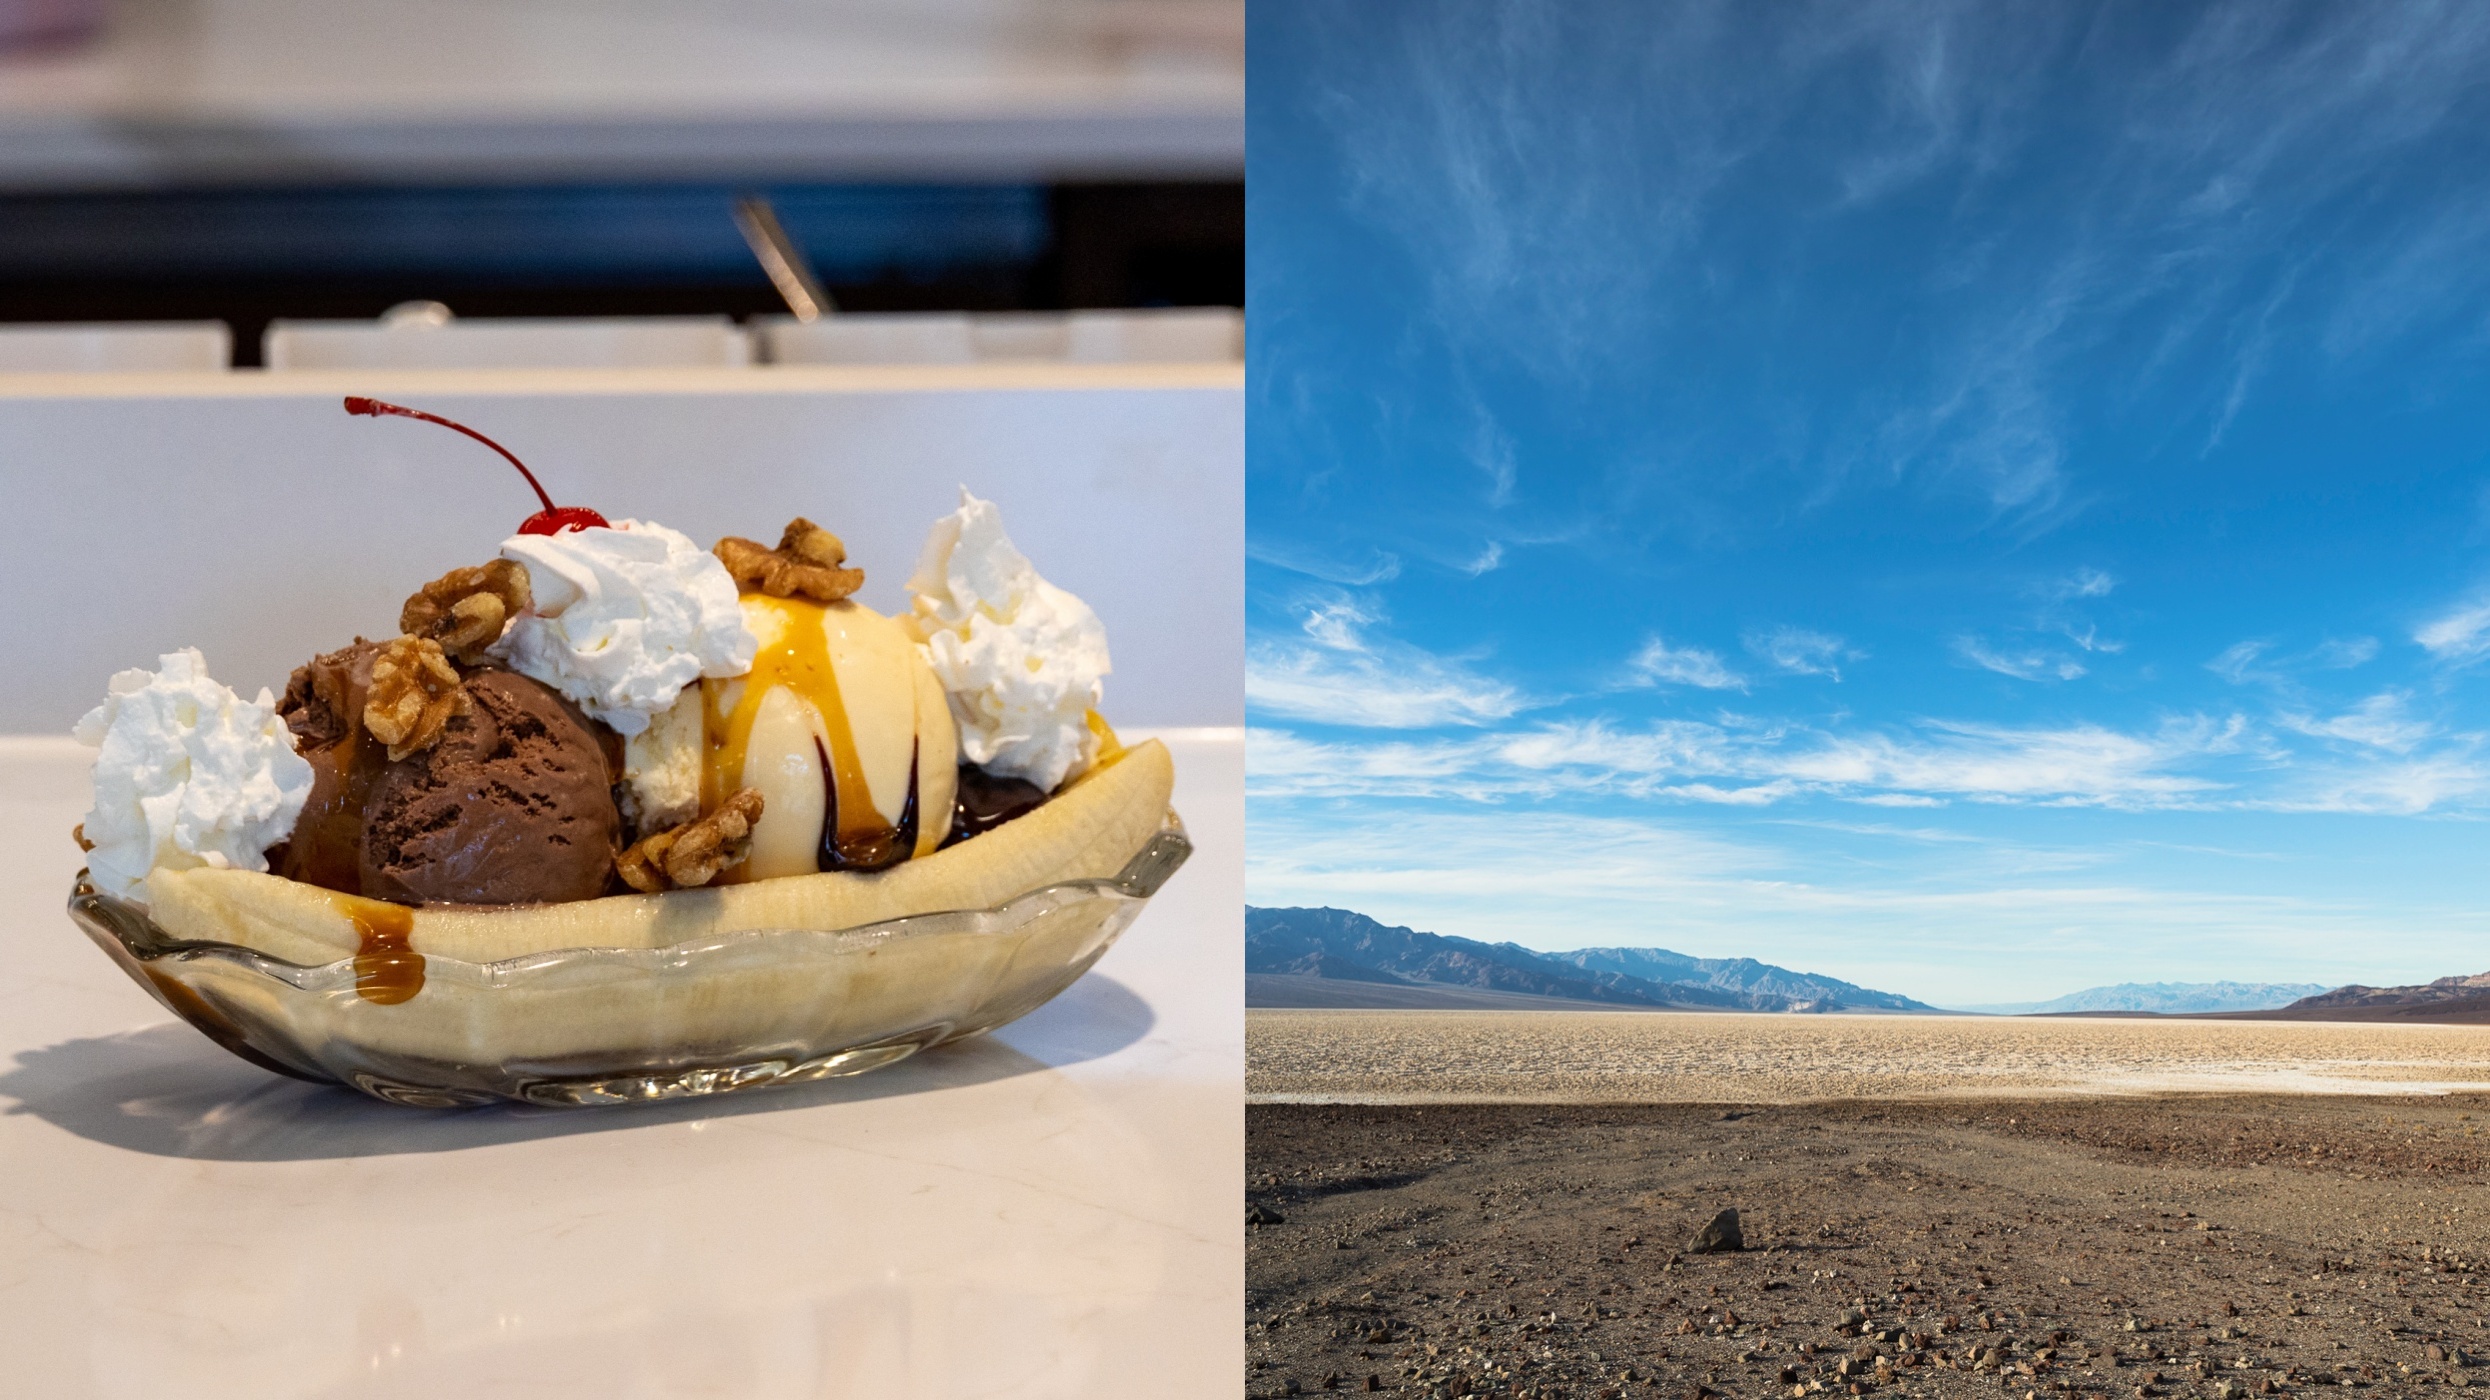 Ice Cream Parlor - The Oasis at Death Valley